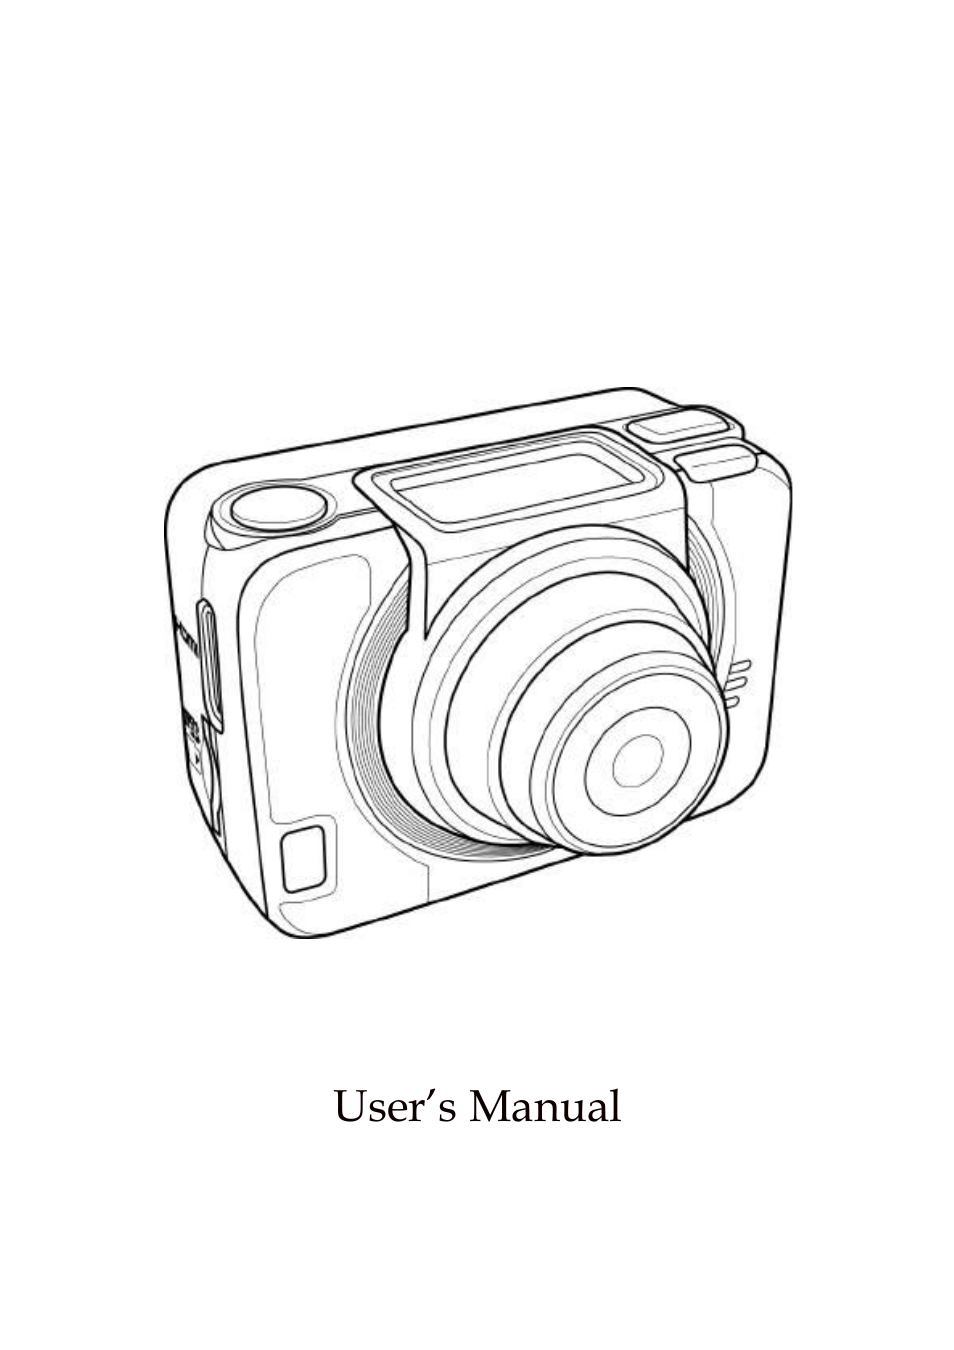 WASPcam GIDEON HD Action Camera User Manual | 69 pages